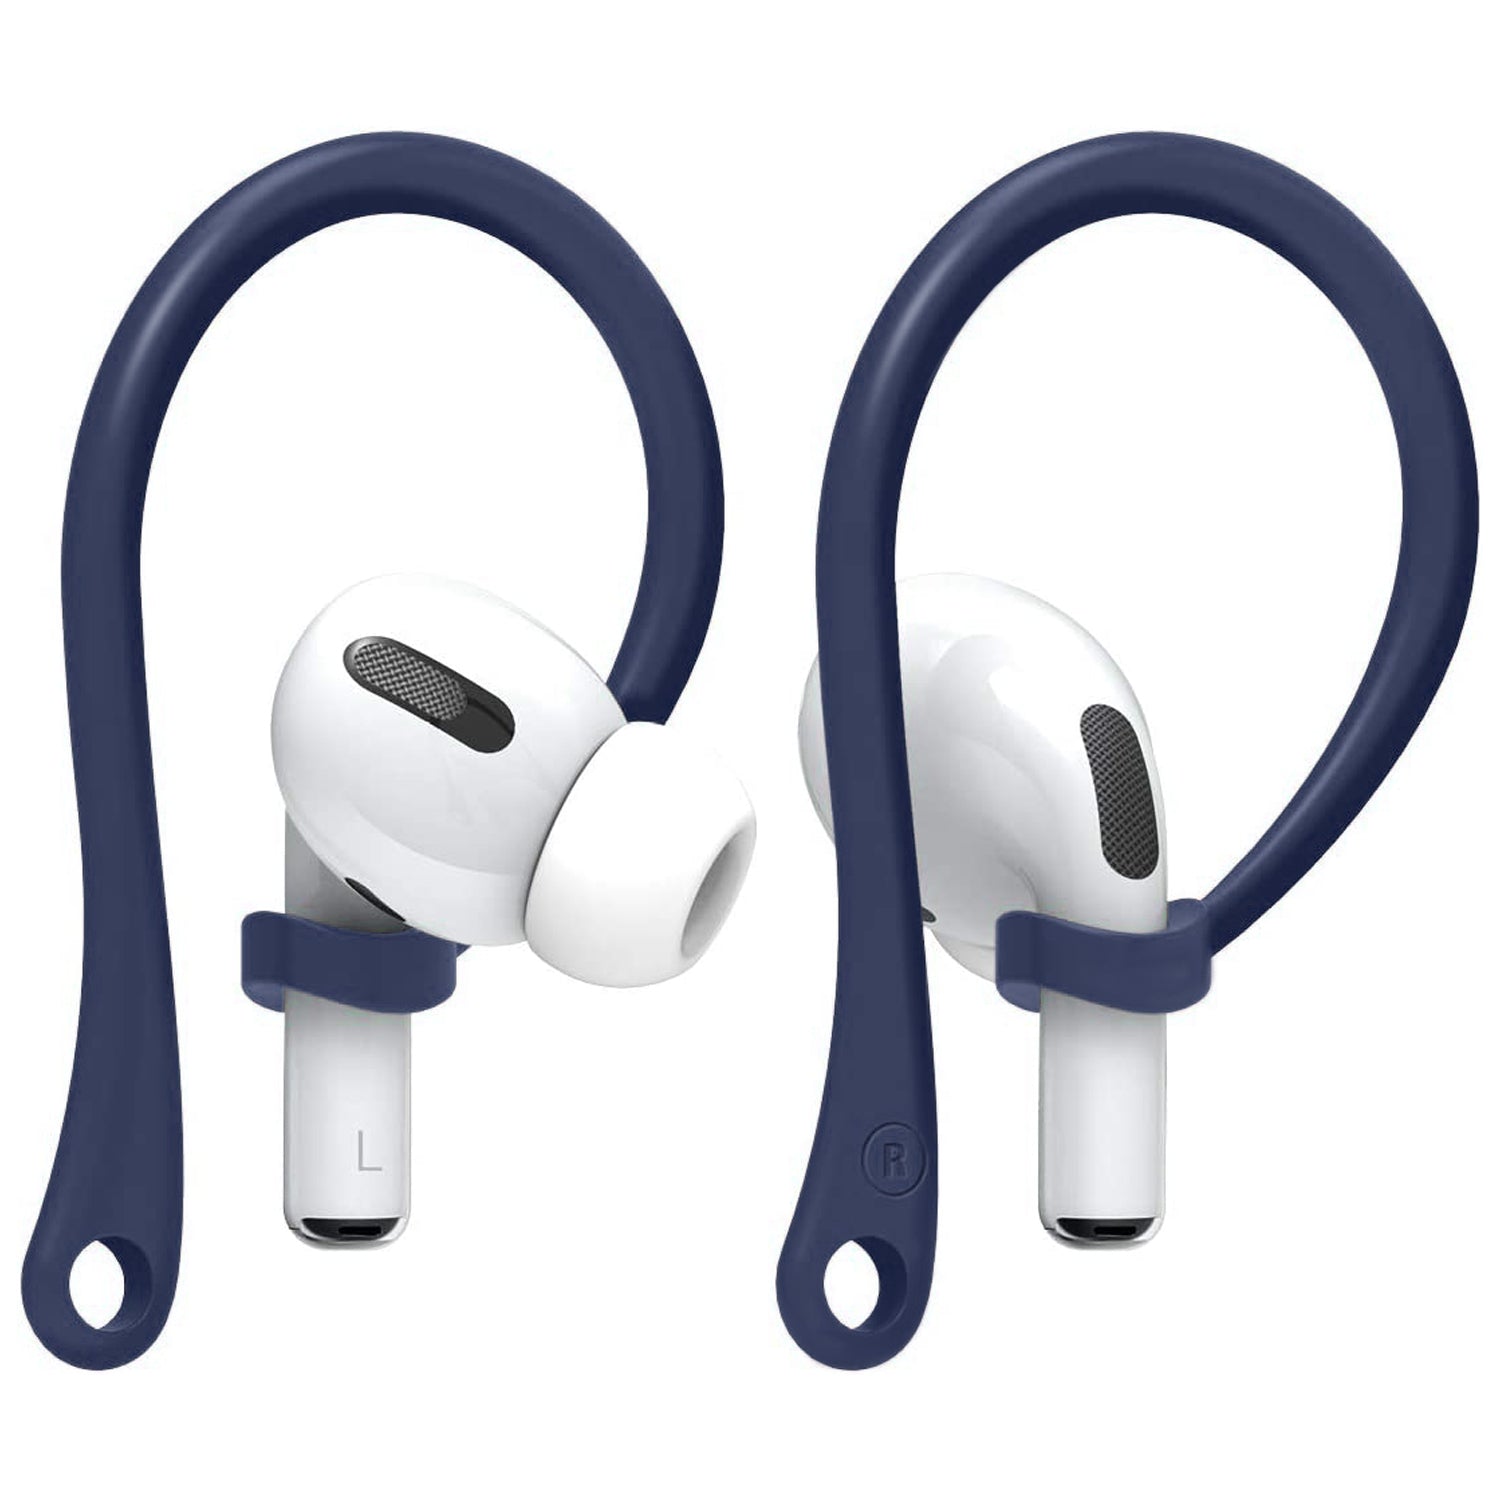 Anti-lost apple ear pods hook for AirPods ((2Pack))